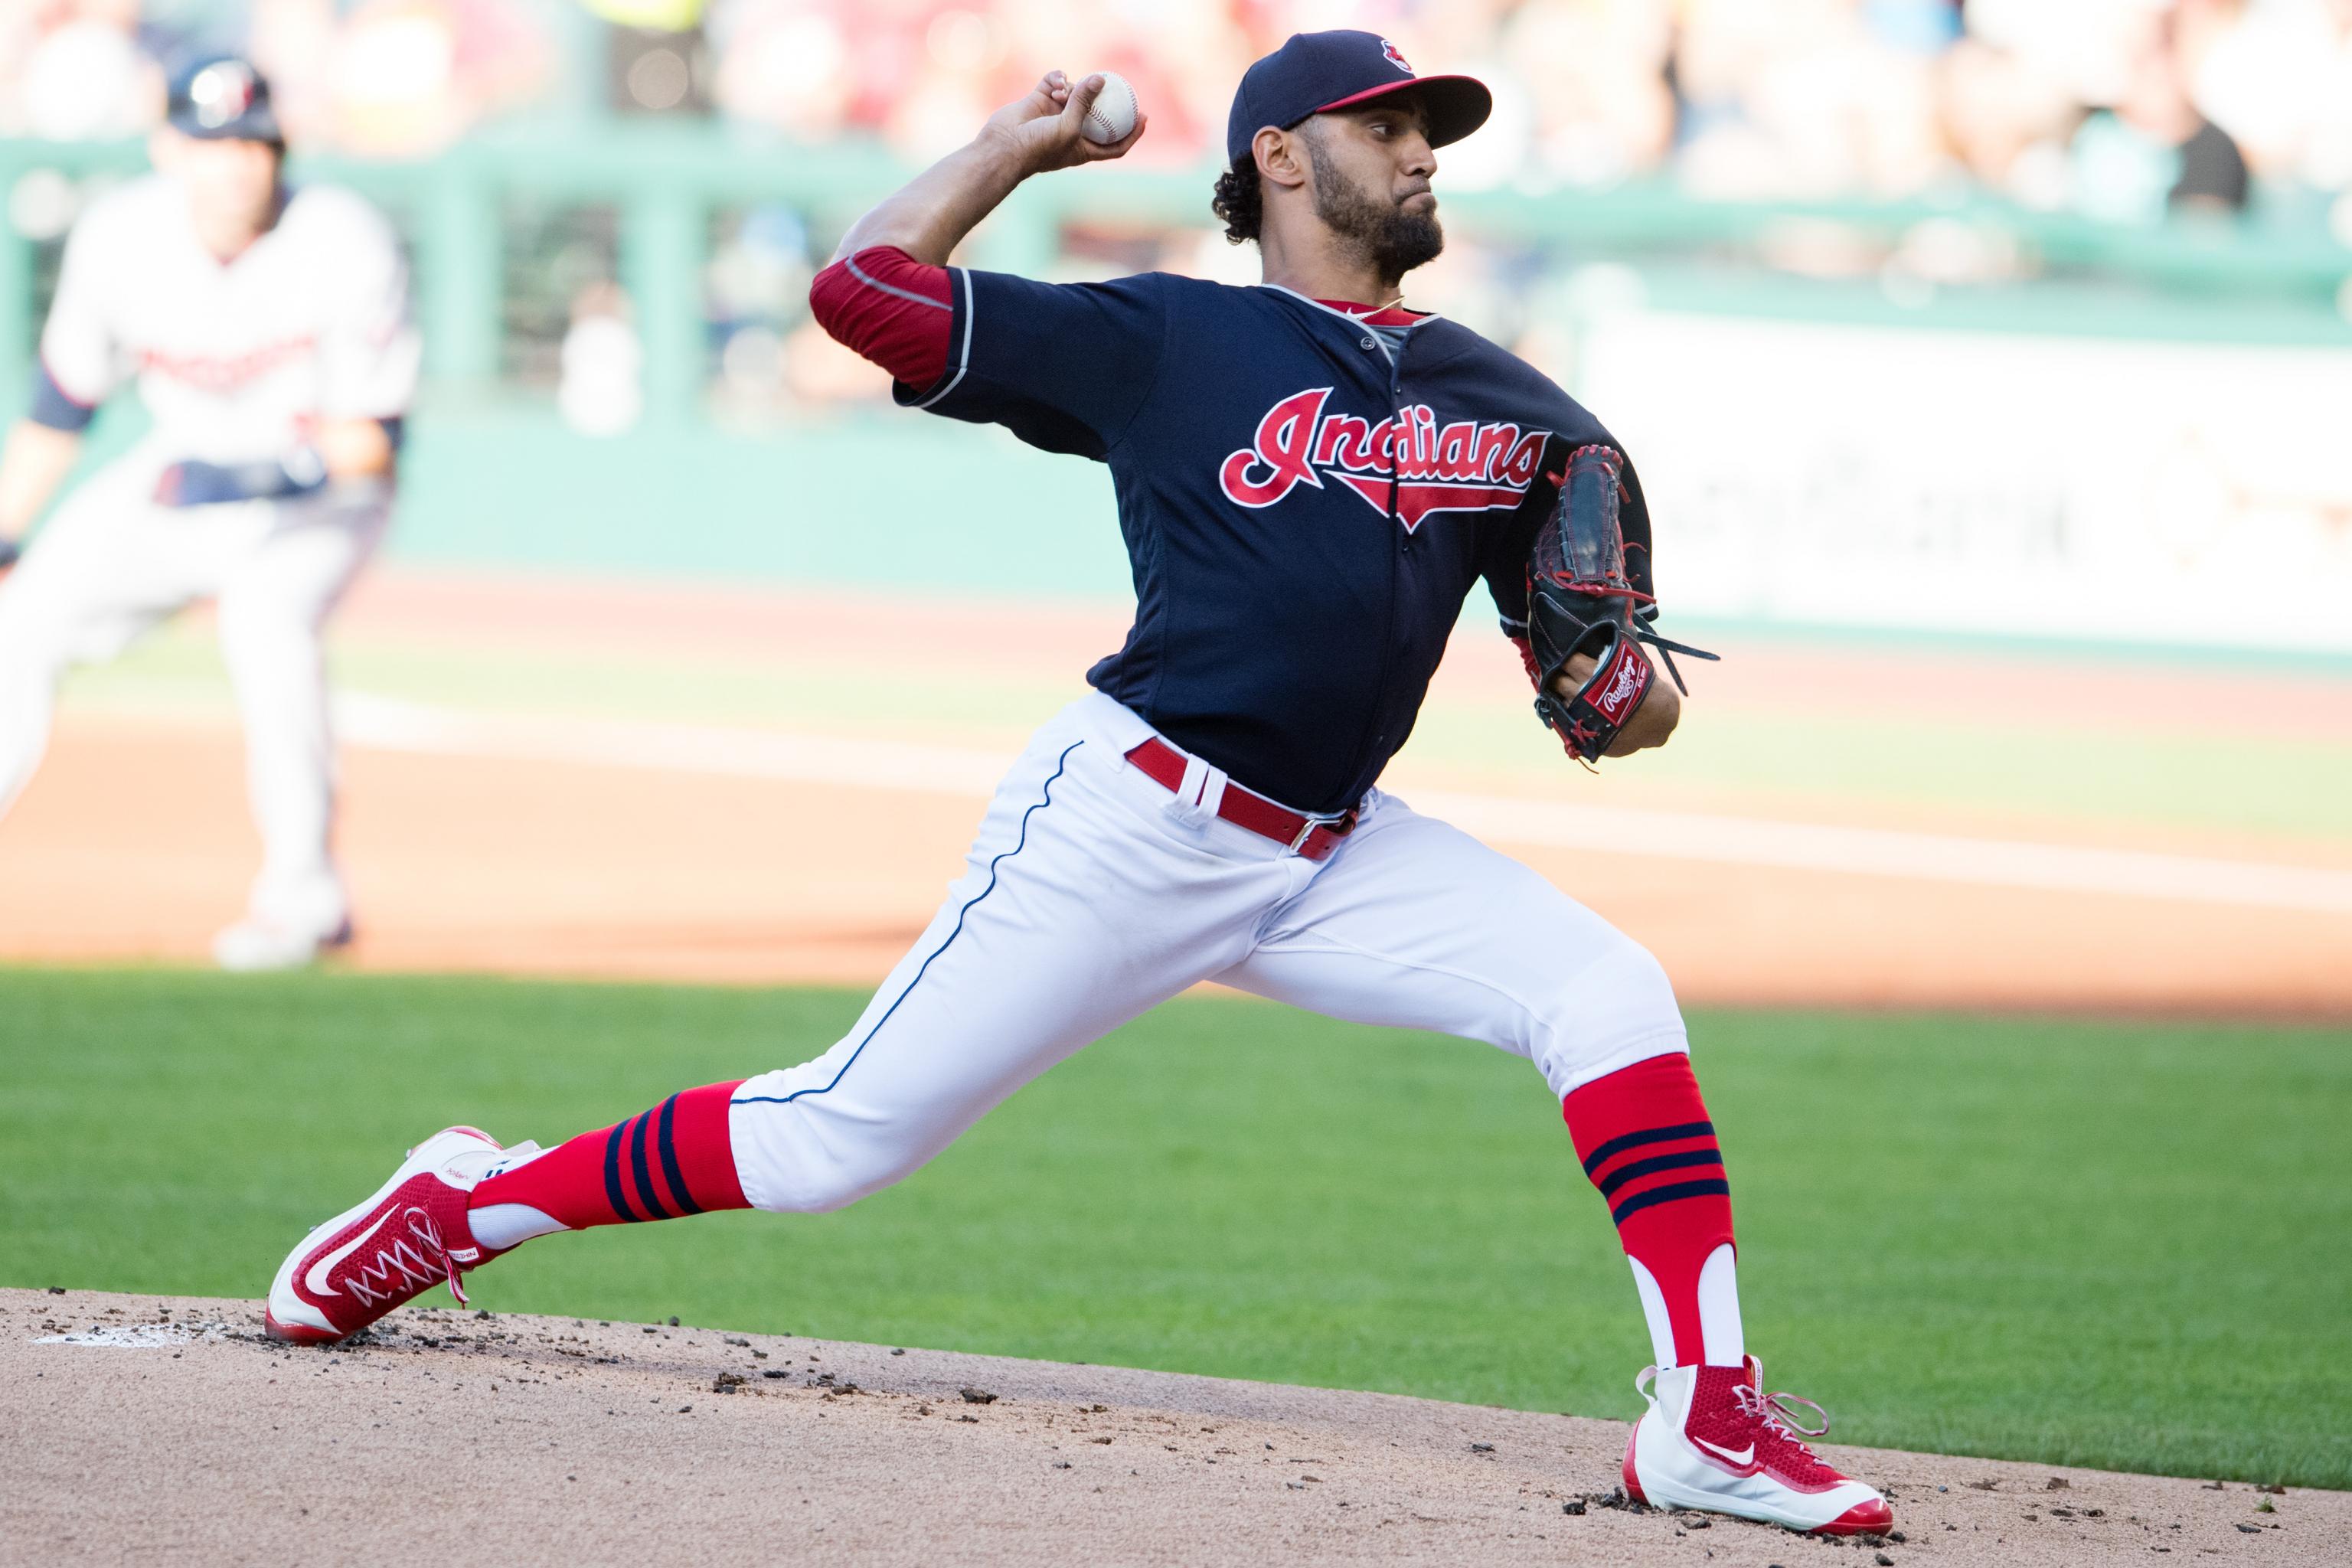 Indians 2016 World Series roster: Danny Salazar makes the team